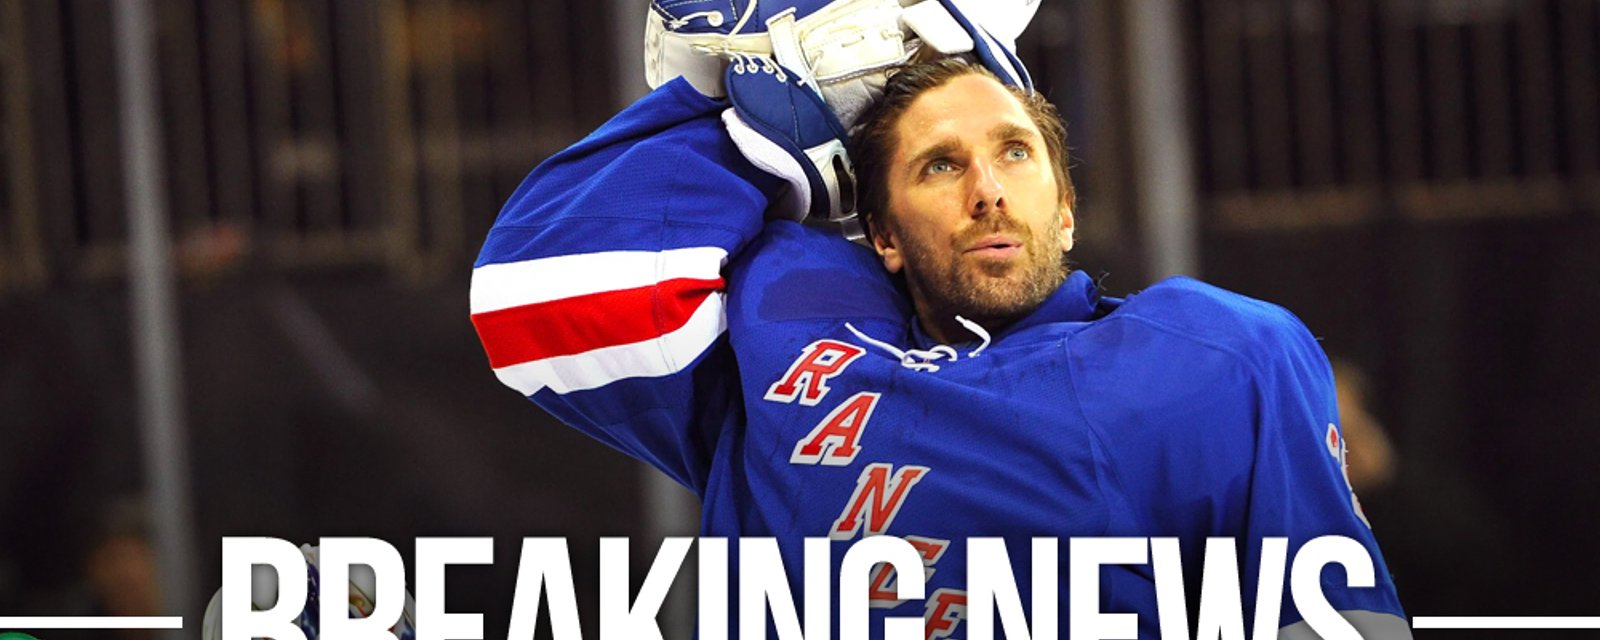 Henrik Lundqvist announces he will not join the Capitals this season, NHL future is in doubt